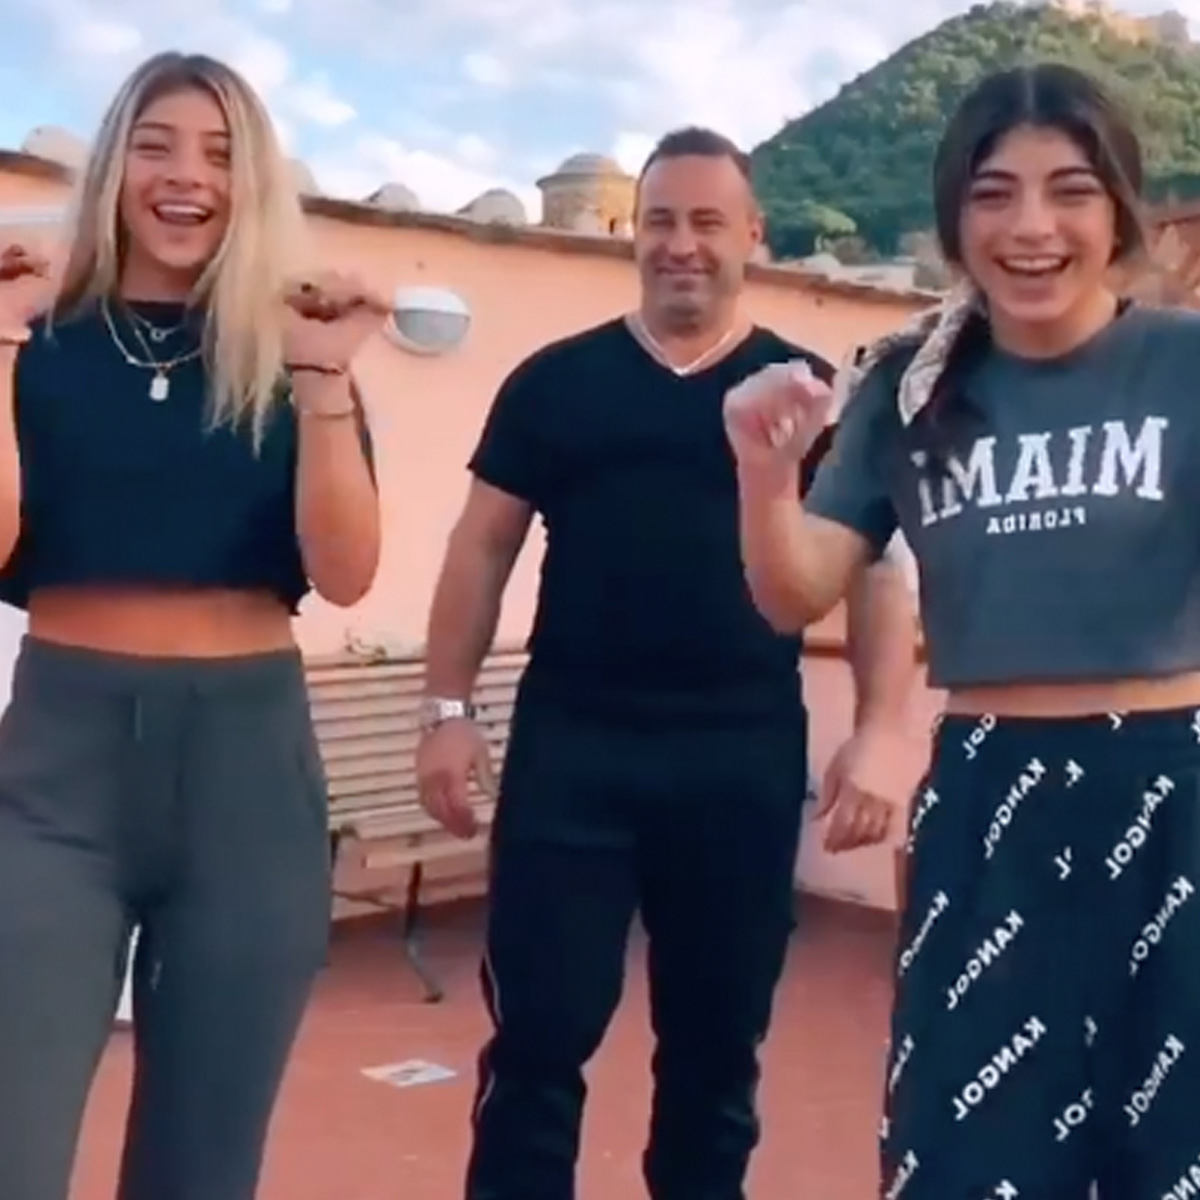 Watch Joe Giudice Adorably Fail at This TikTok Dance With His Daughters